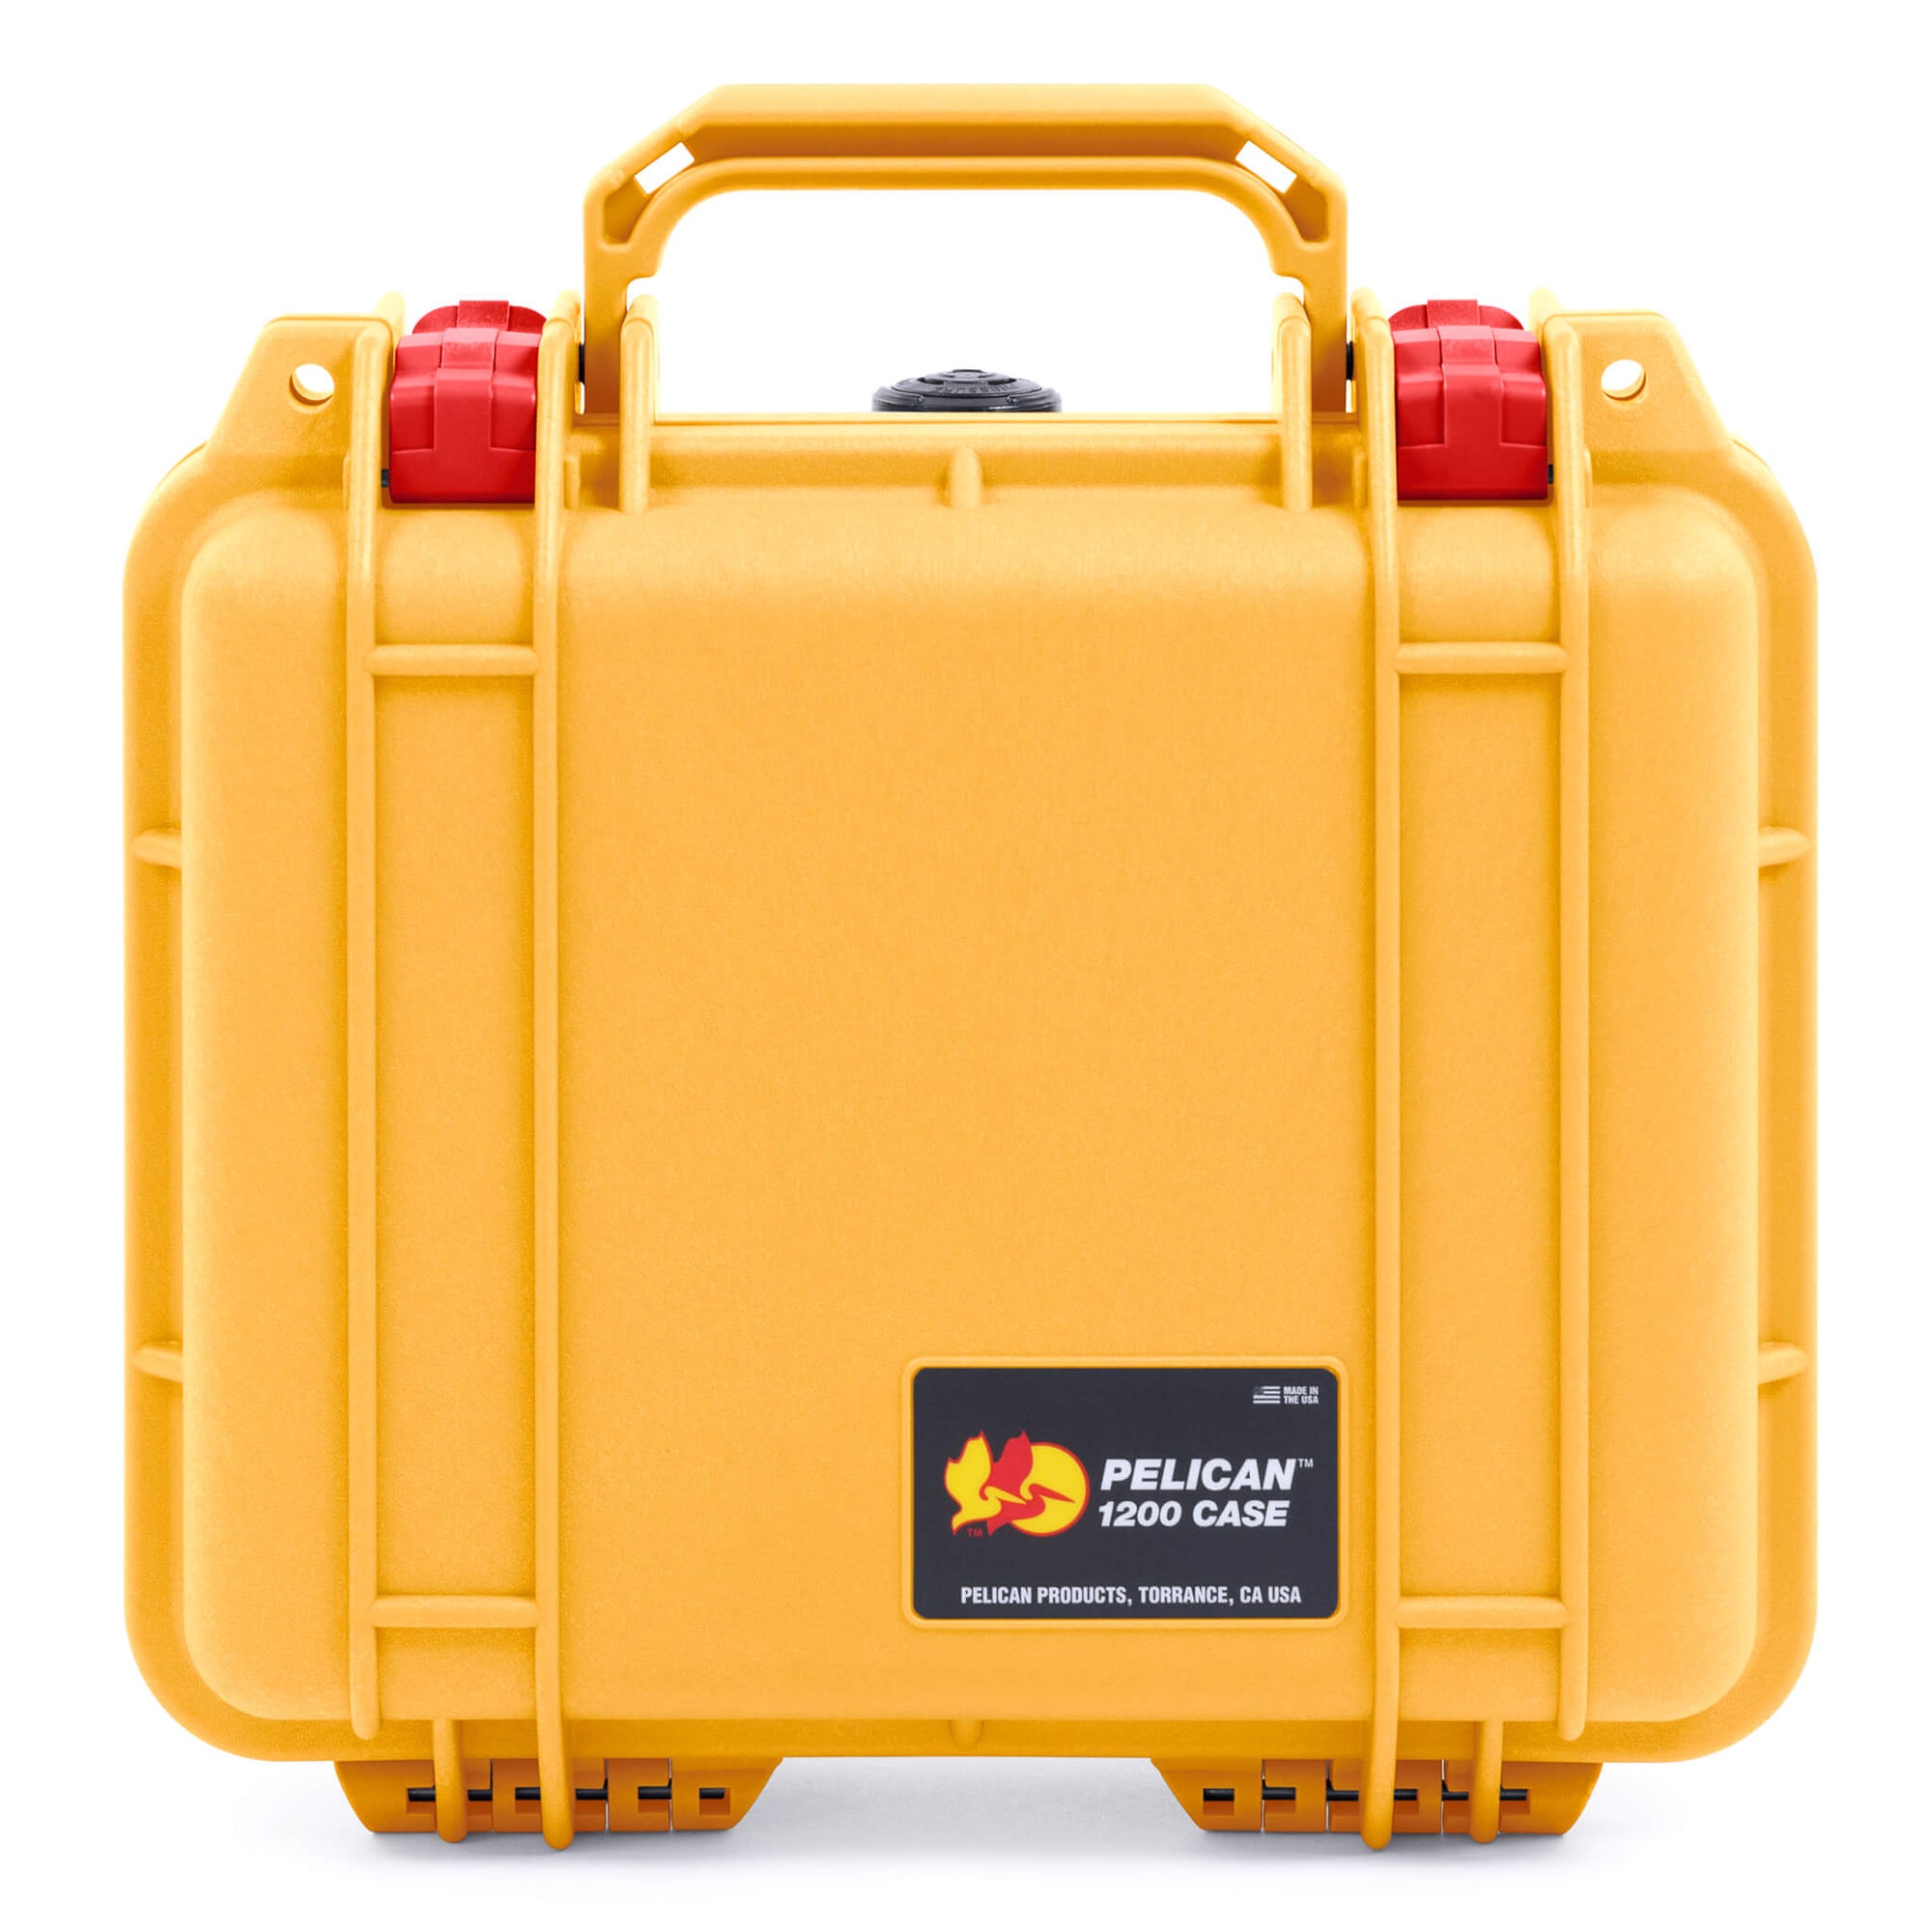 Pelican 1200 Case, Yellow with Red Latches ColorCase 